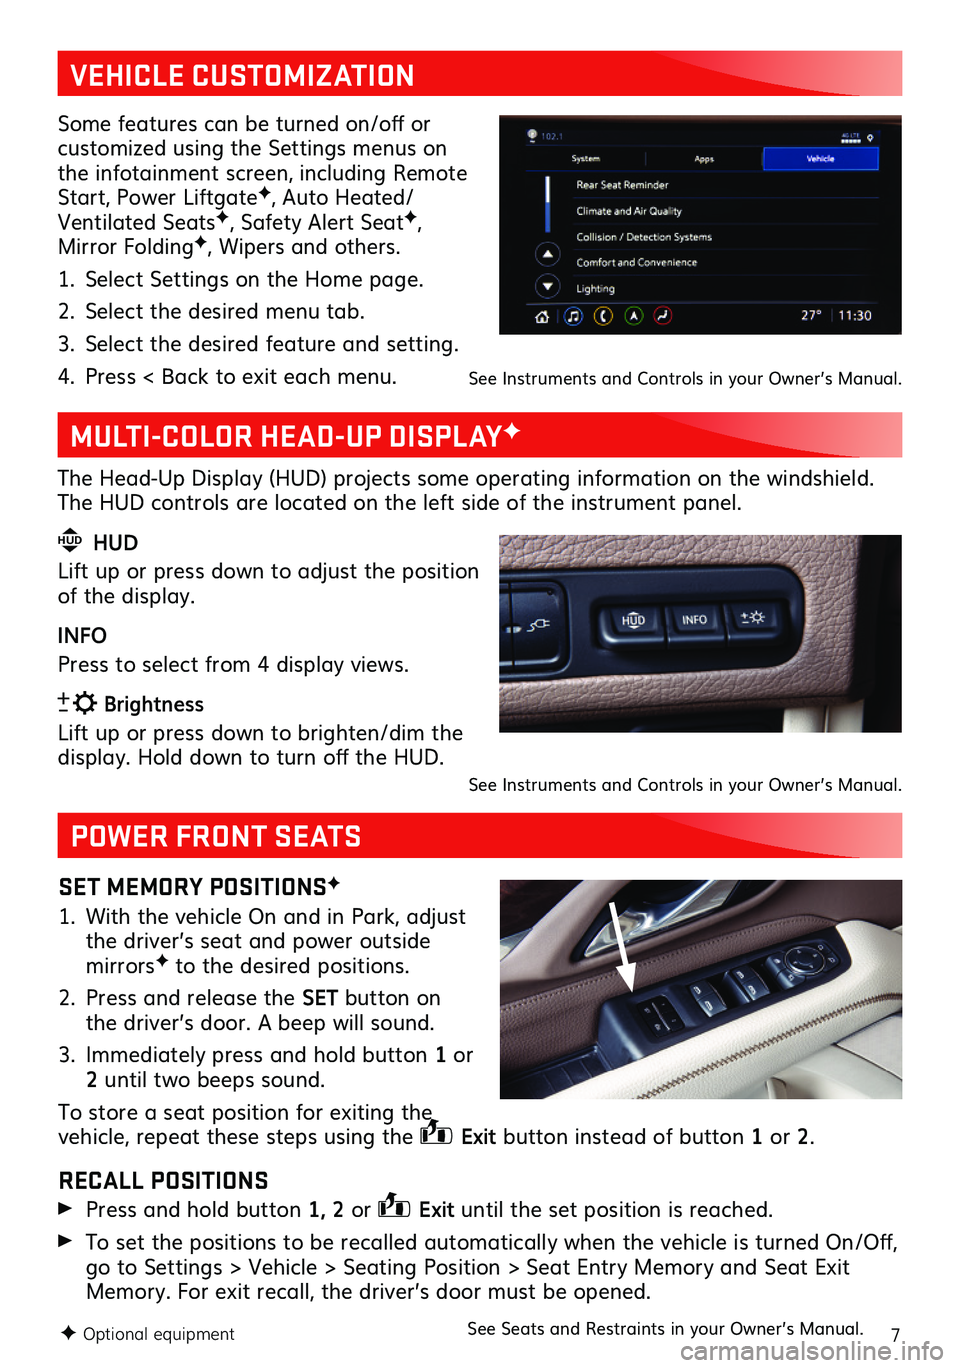 GMC YUKON 2021  Get To Know Guide 7F Optional equipment
Some features can be turned on/off or customized using the Settings menus on the infotainment screen, including Remote Start, Power LiftgateF, Auto Heated/Ventilated SeatsF, Safe